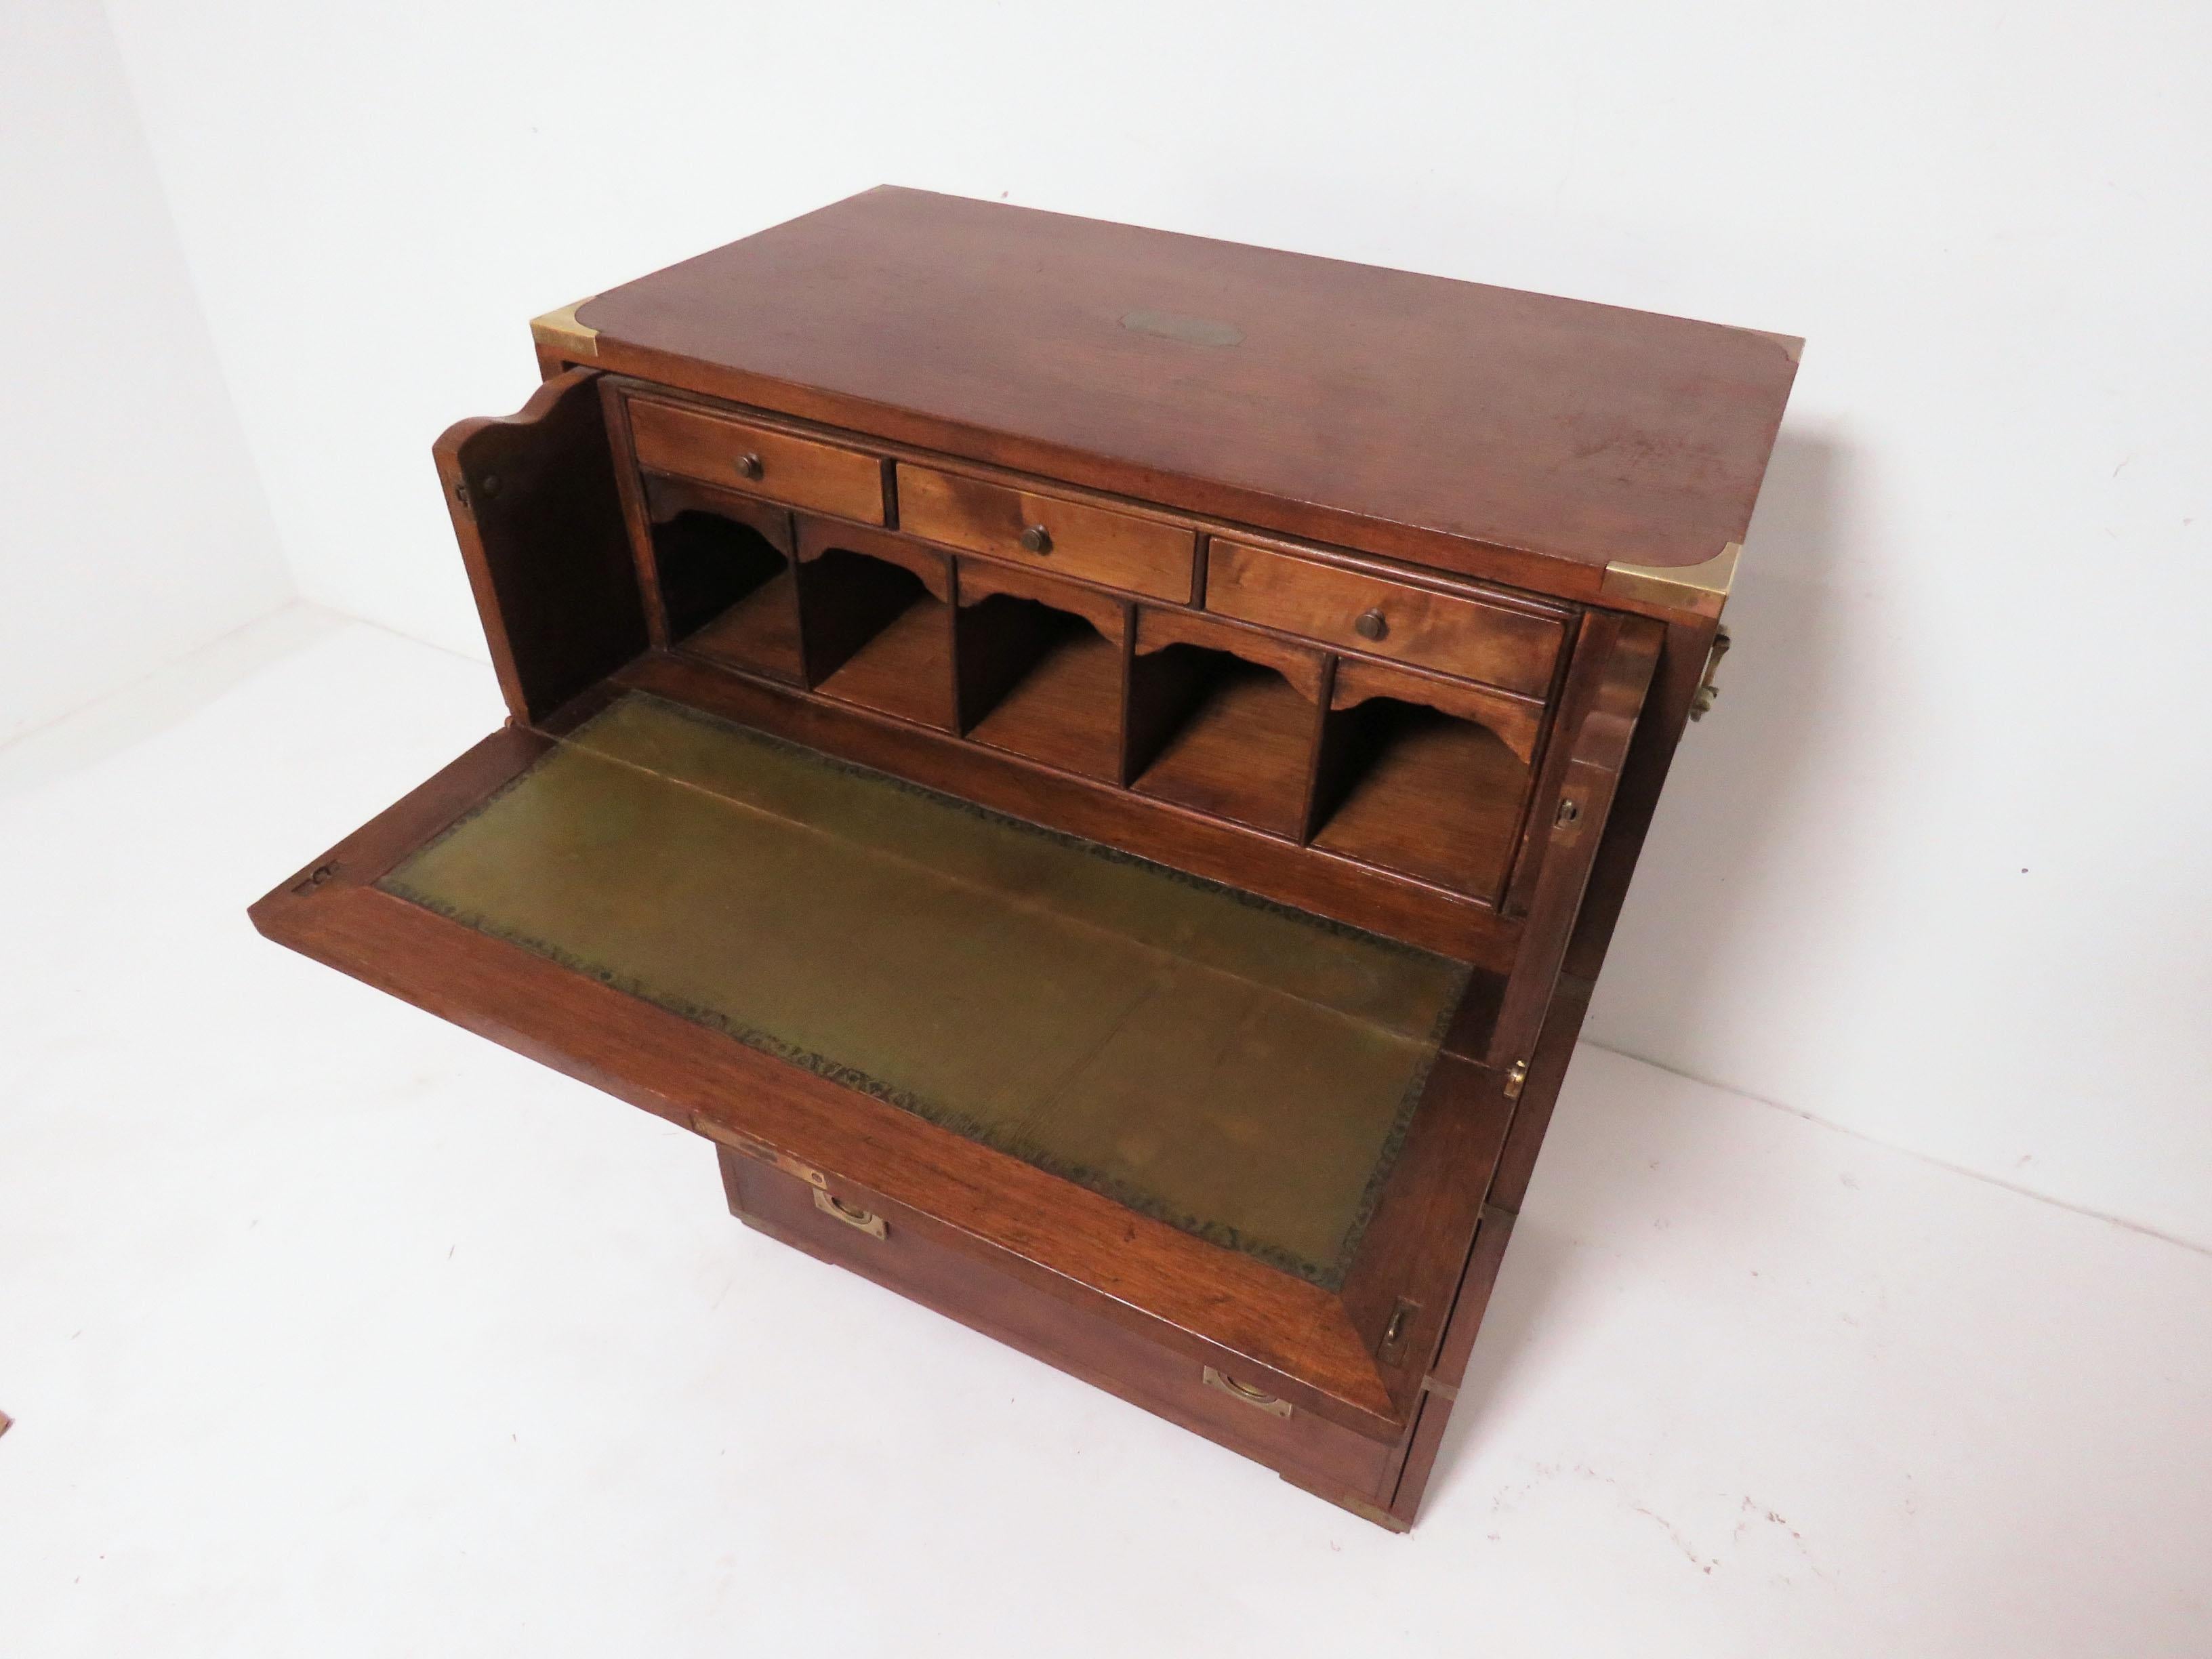 Late 19th Century Antique Mahogany Campaign Chest with Desk Drawer, circa 1890s